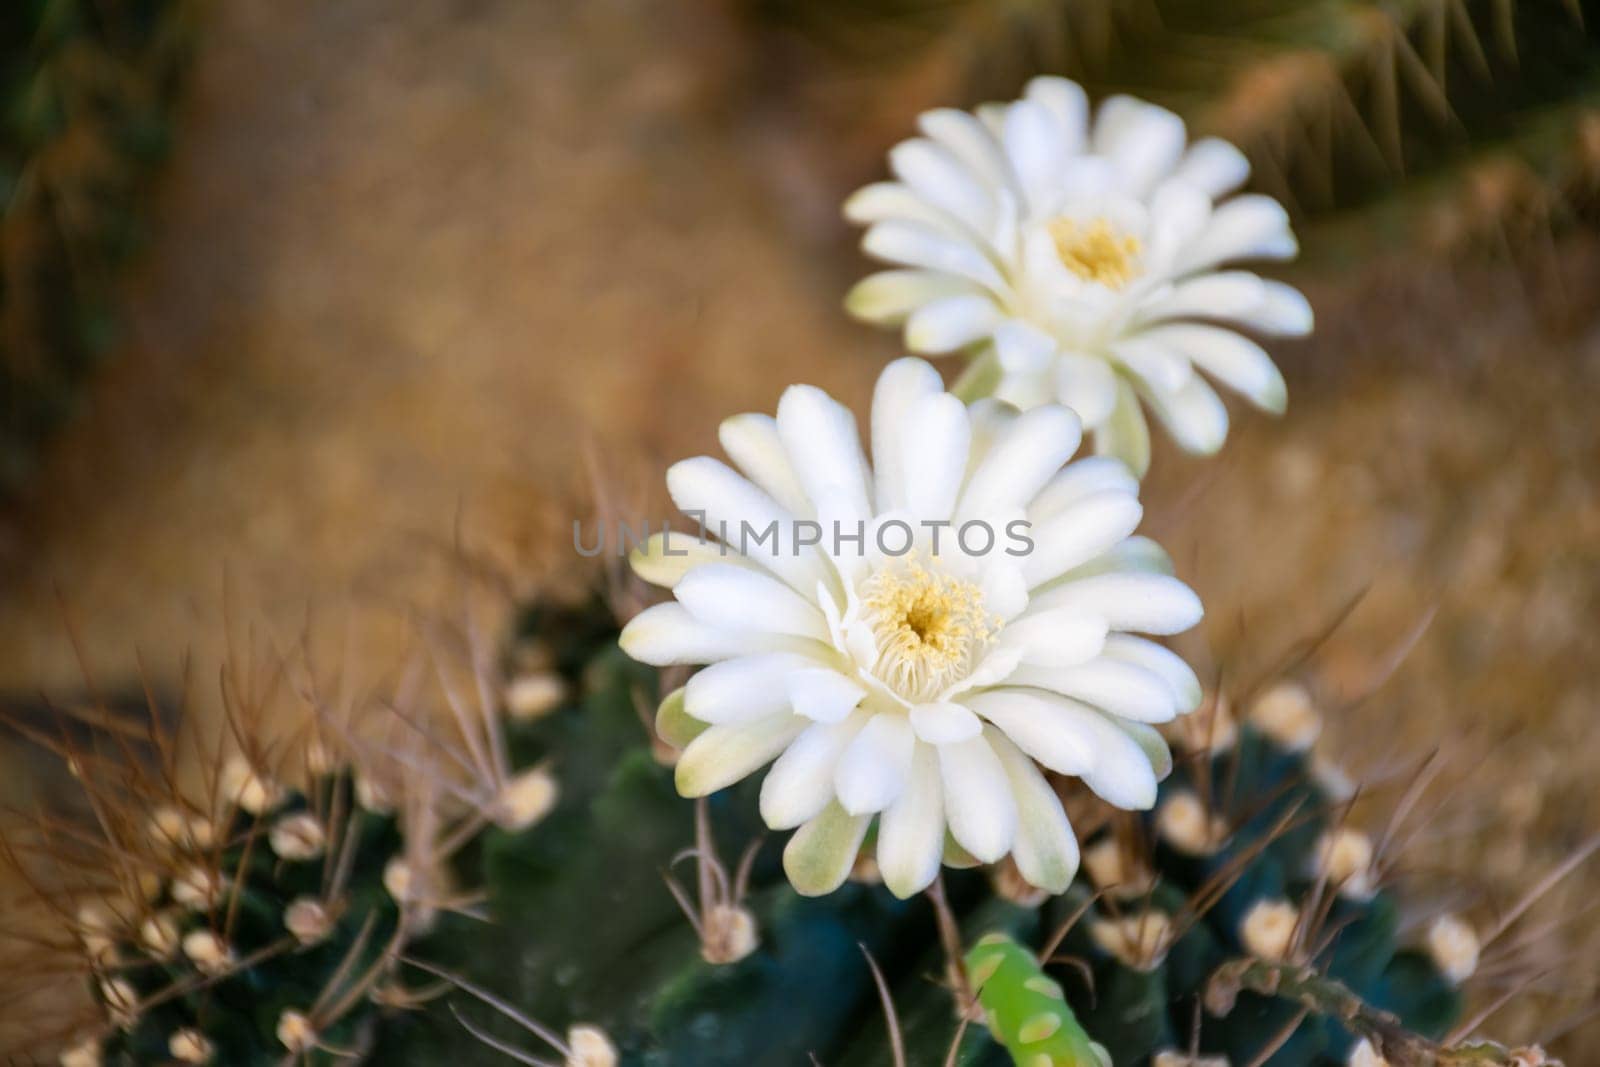 Cactus and Cactus flowers popular for decorative by NongEngEng